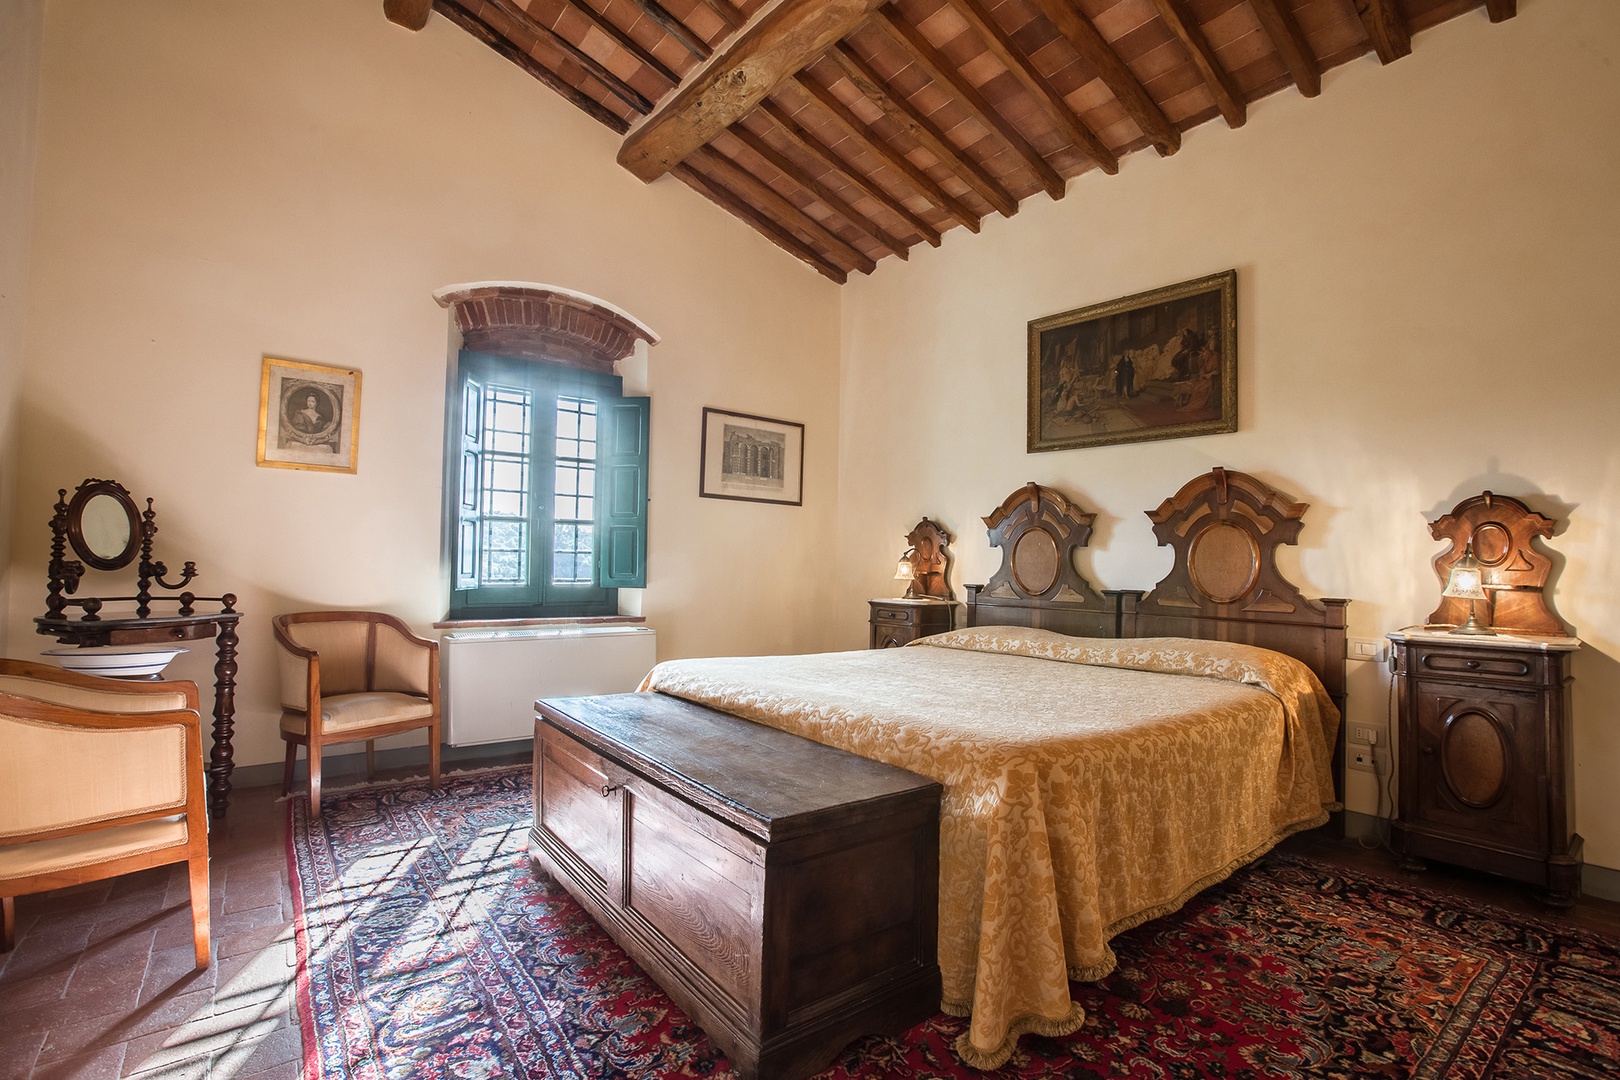 Bedroom 1 features a comfortable bed with intriguing Louis Philippe Tuscan headboards.